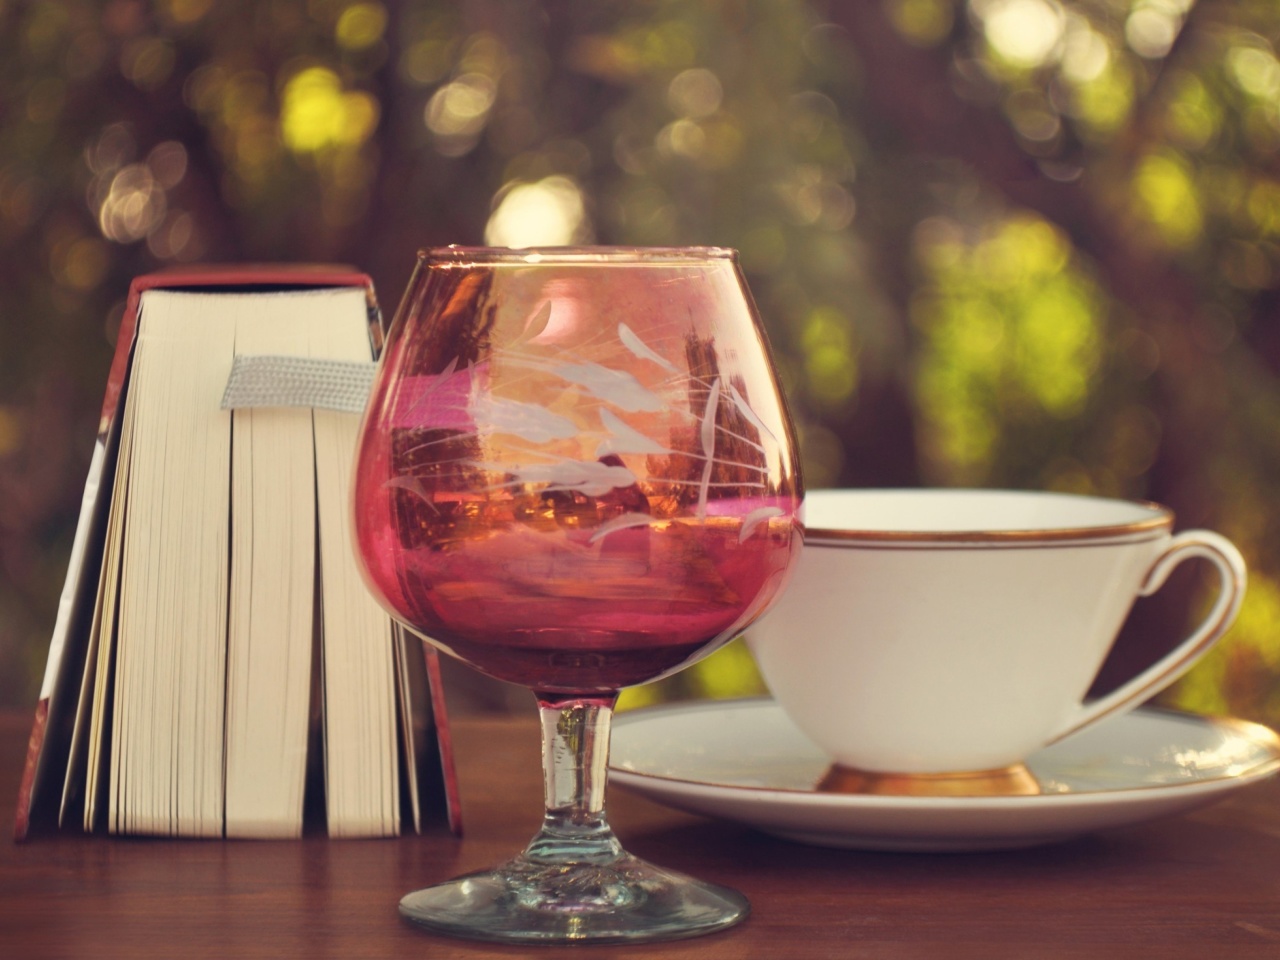 Perfect day with wine and book screenshot #1 1280x960